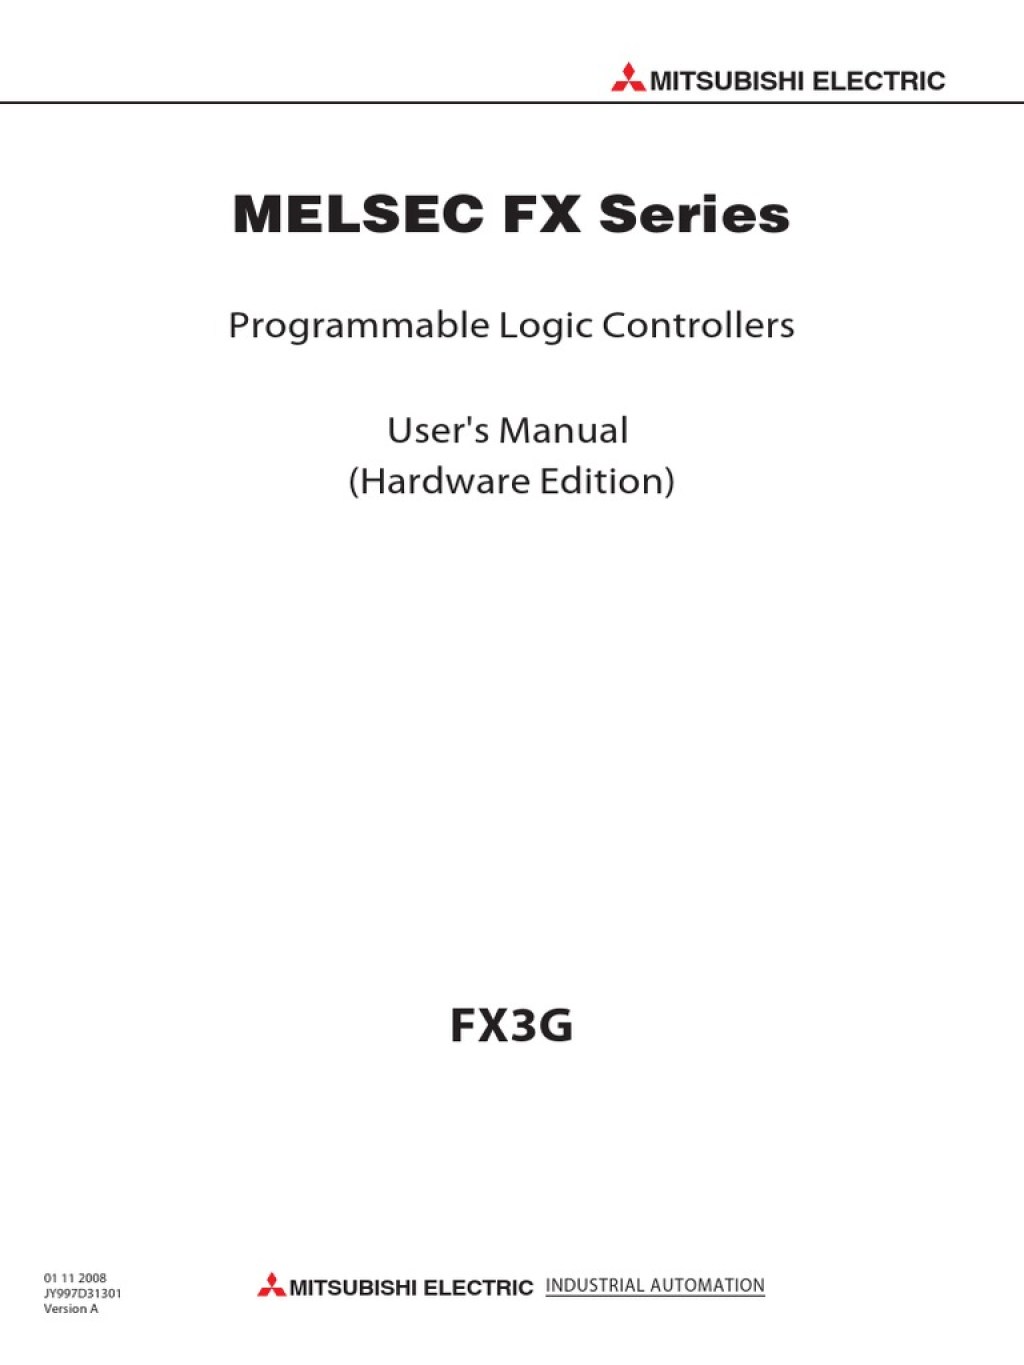 Picture of: FXG Hardware Edition  PDF  Power Supply  Electrical Connector